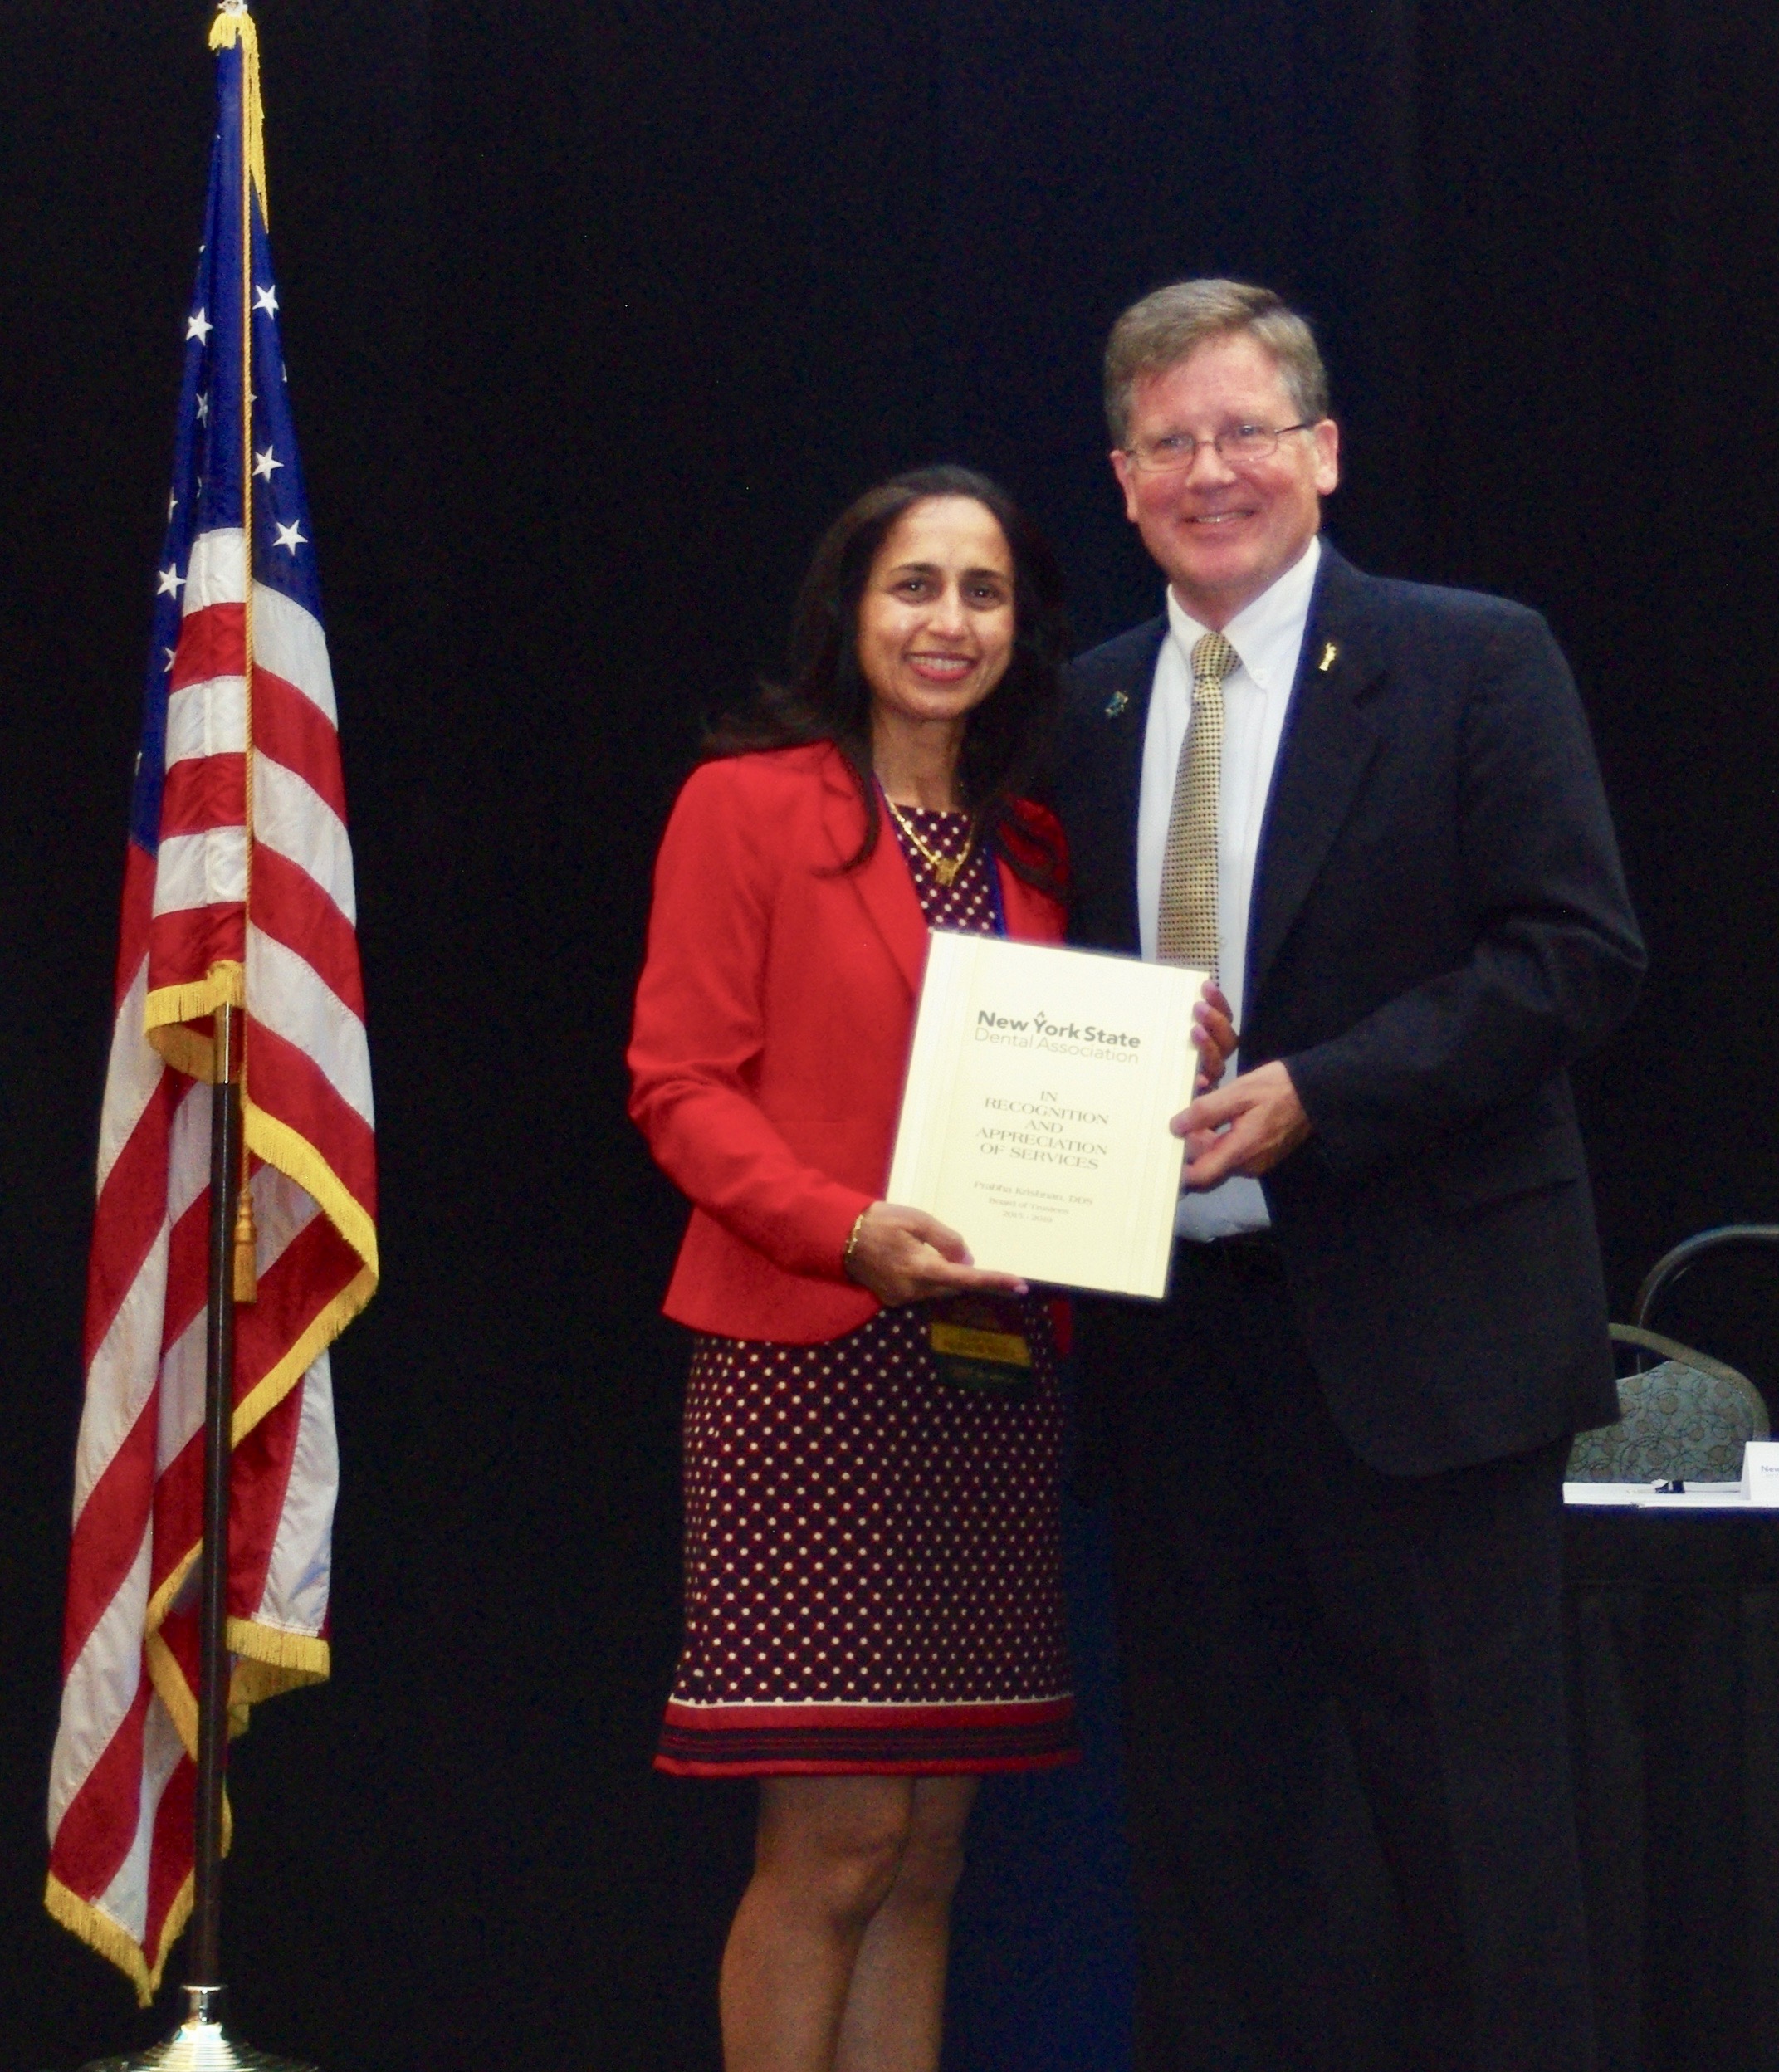 Dr. Prabha Krishnan receives her plaque in dedication of her service as a Trustee on the Board of the New York State Dental Association at the Hyatt Regency, Buffalo on June 9, 2019.